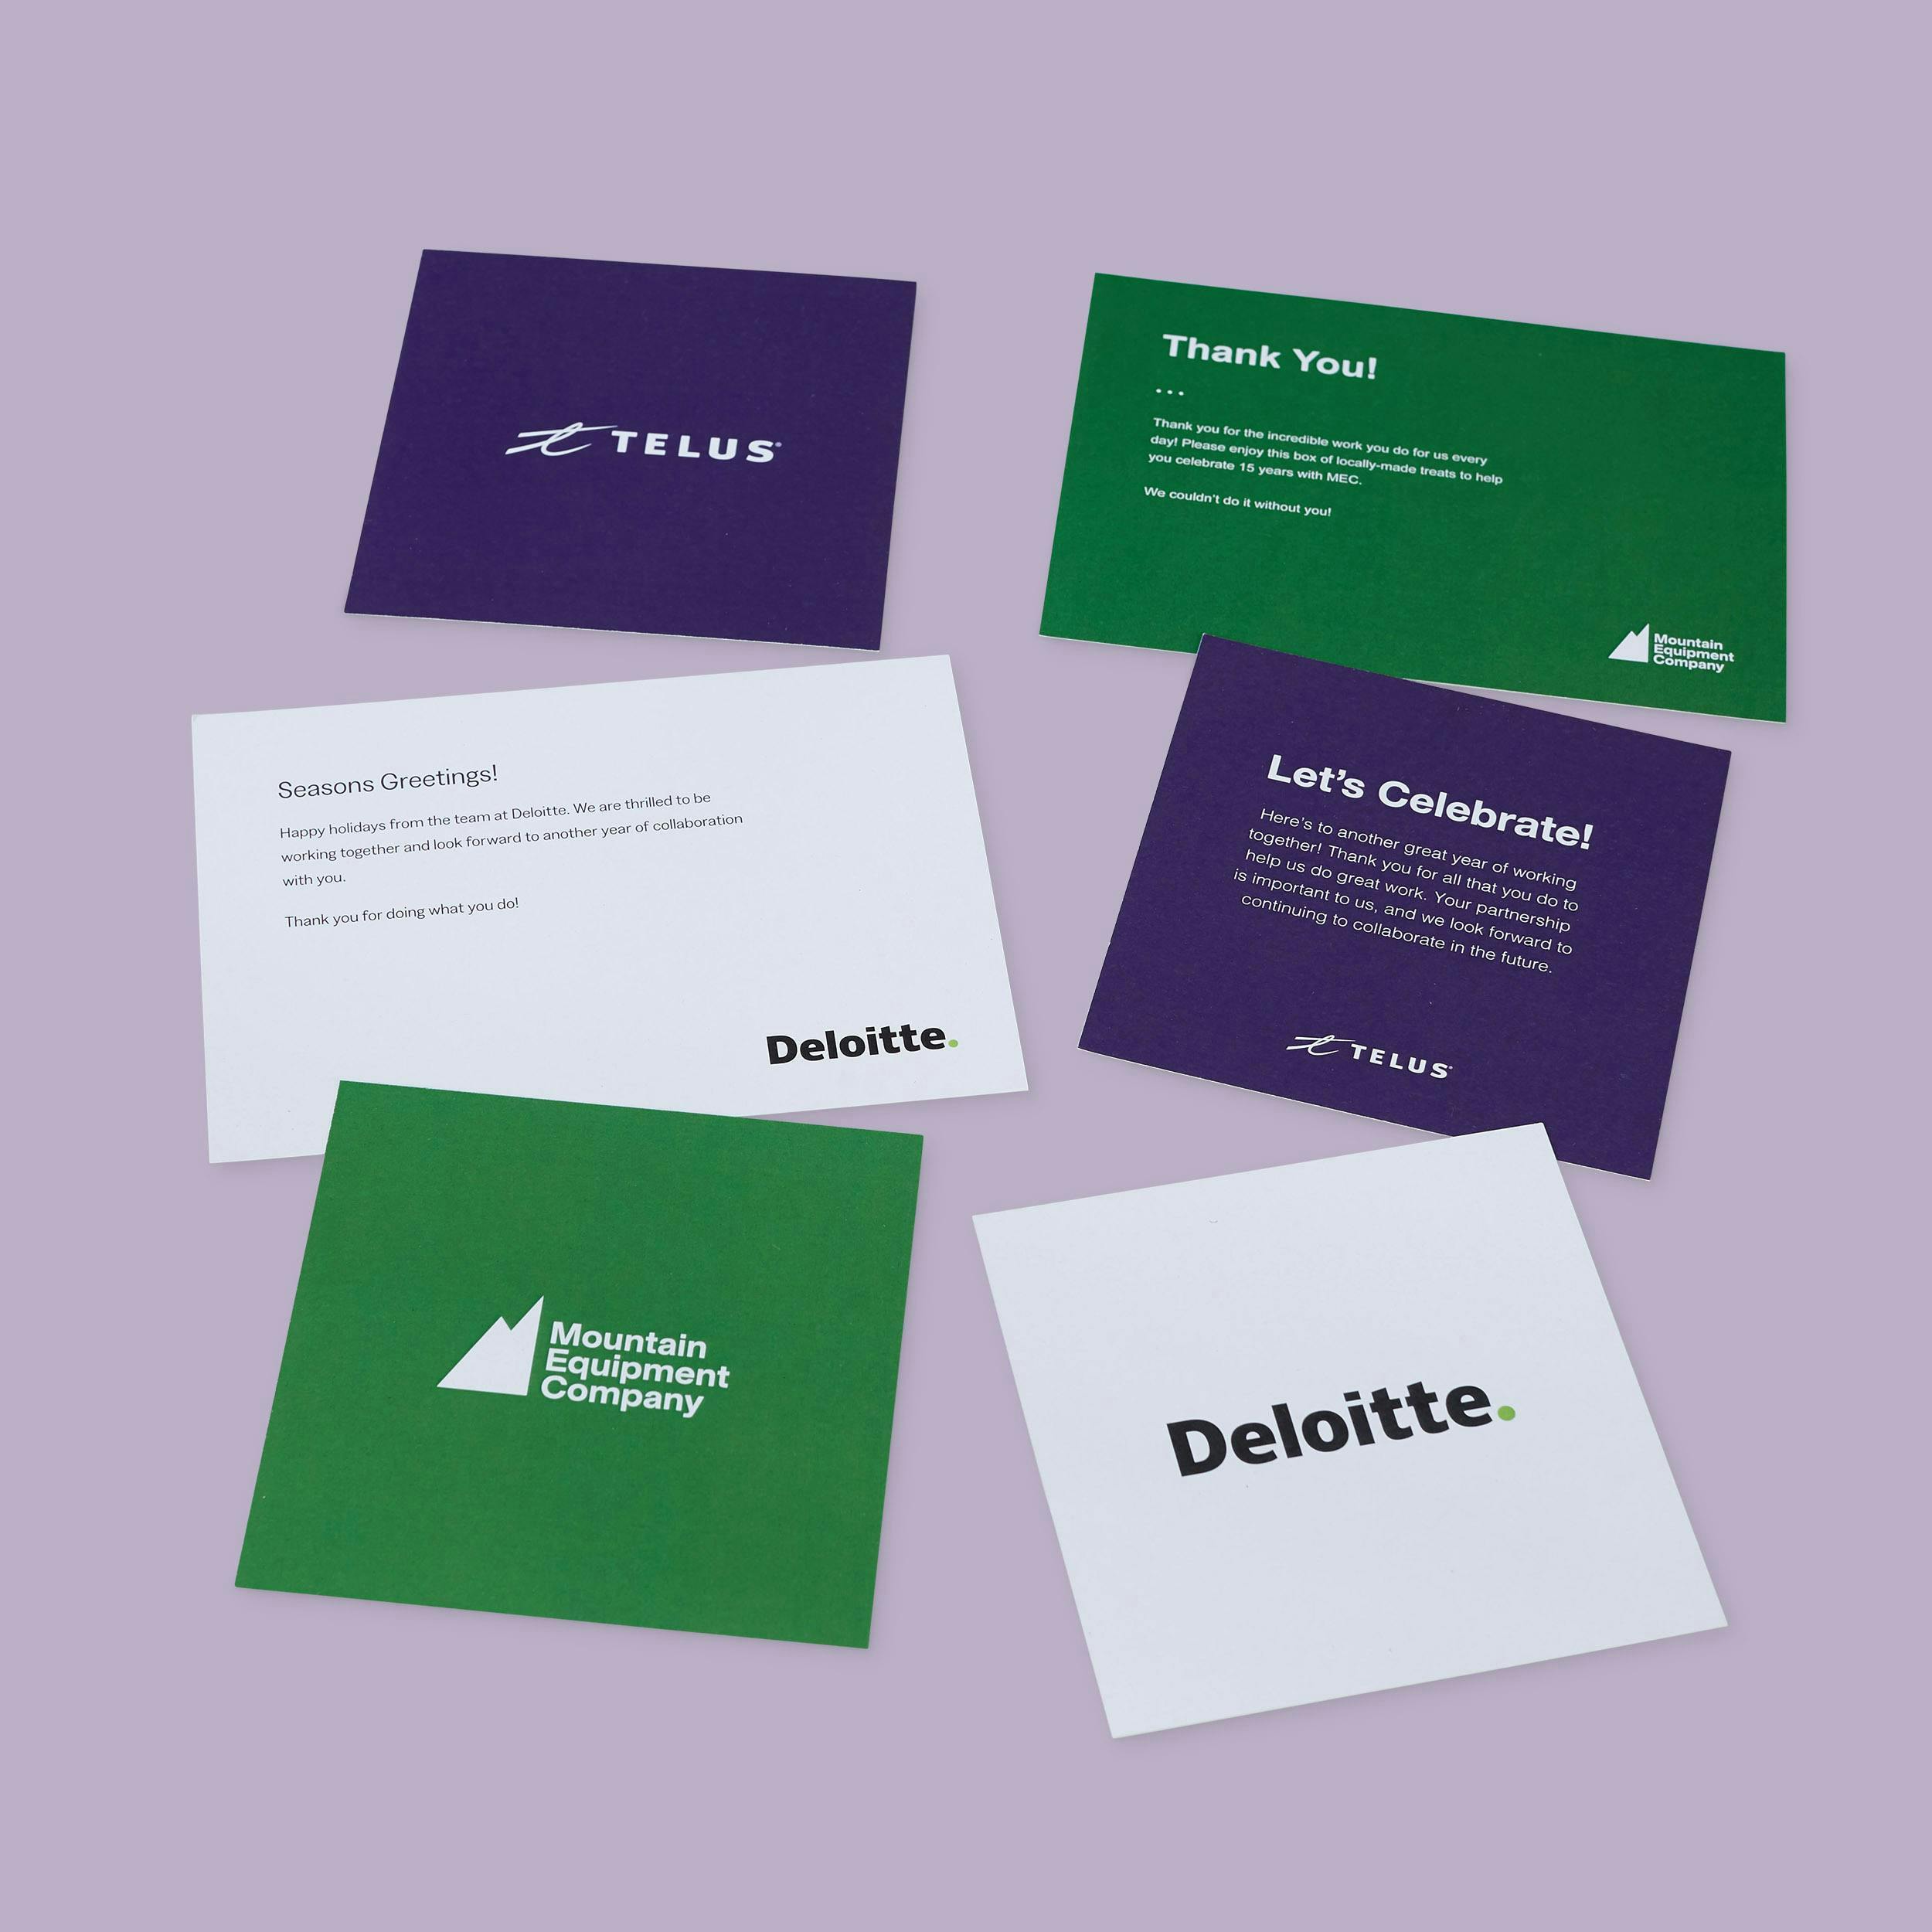 Branded greeting cards showing various corporate logos